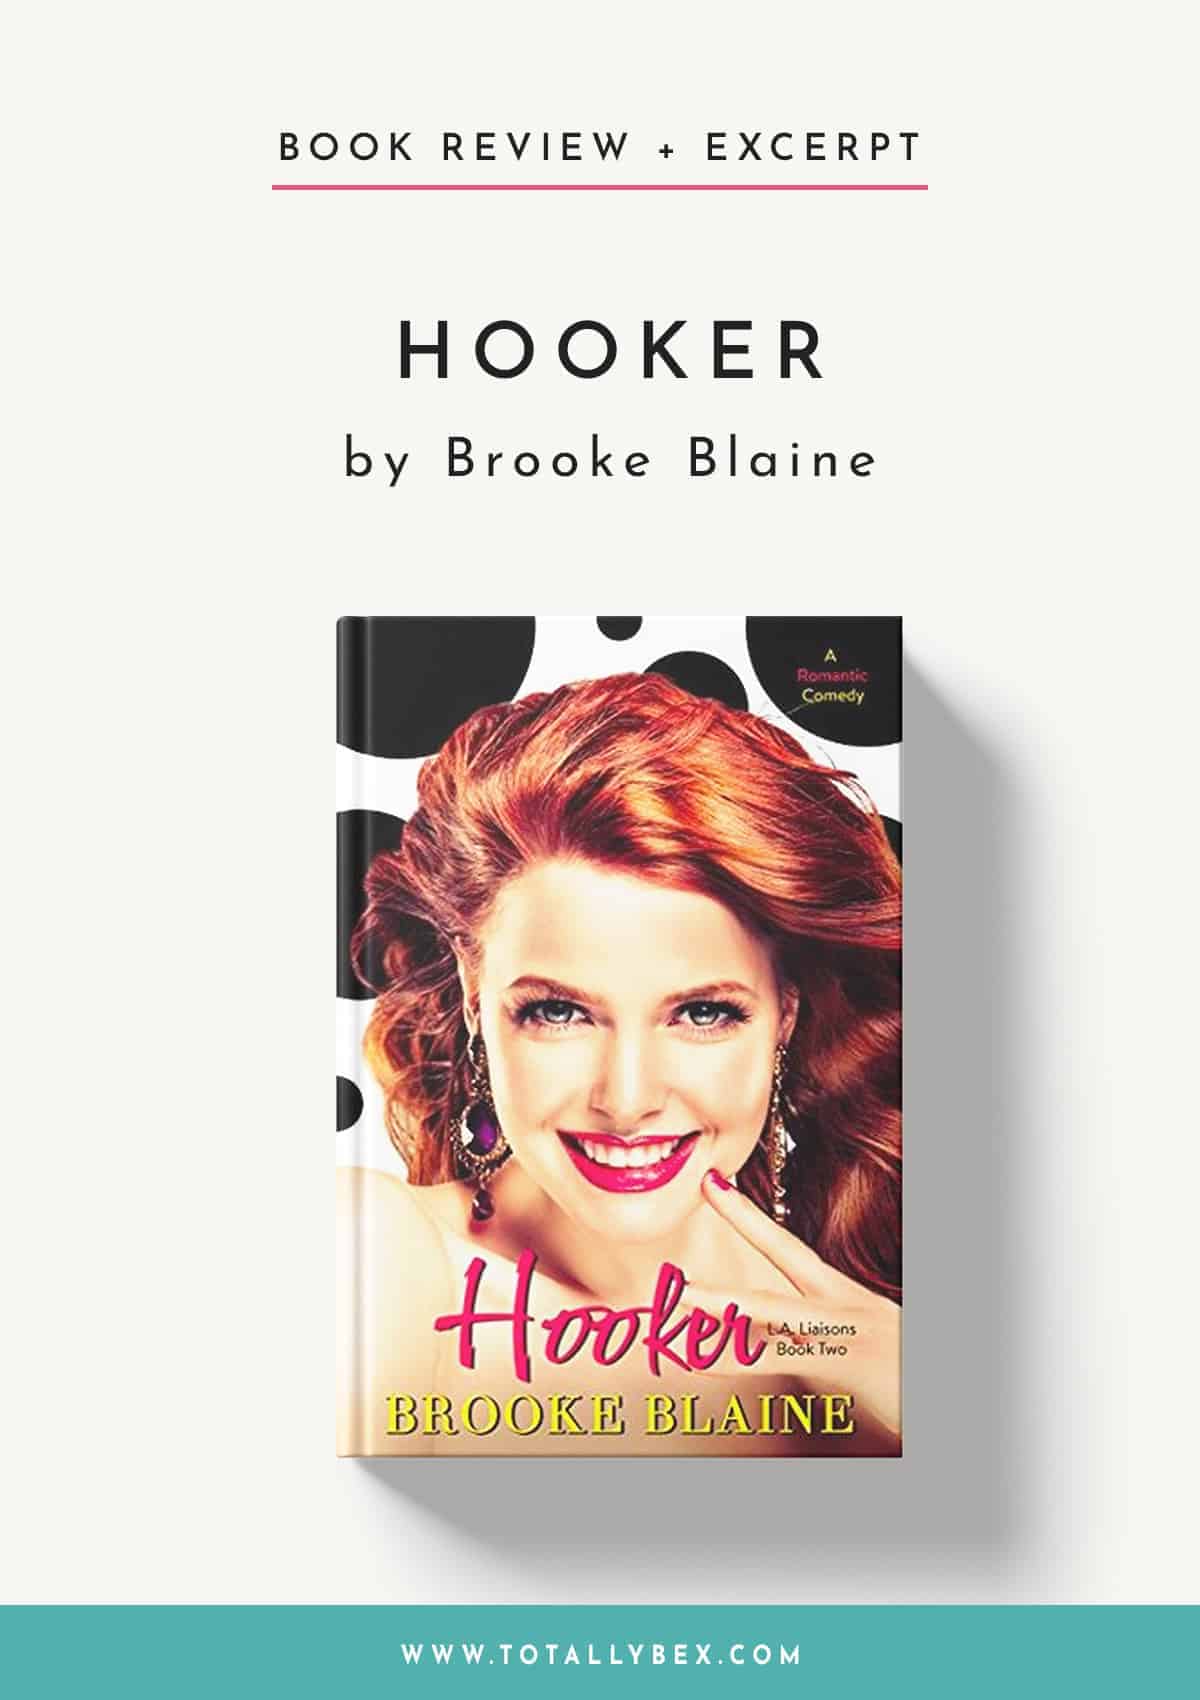 Hooker by Brooke Blaine-Book Review+Excerpt